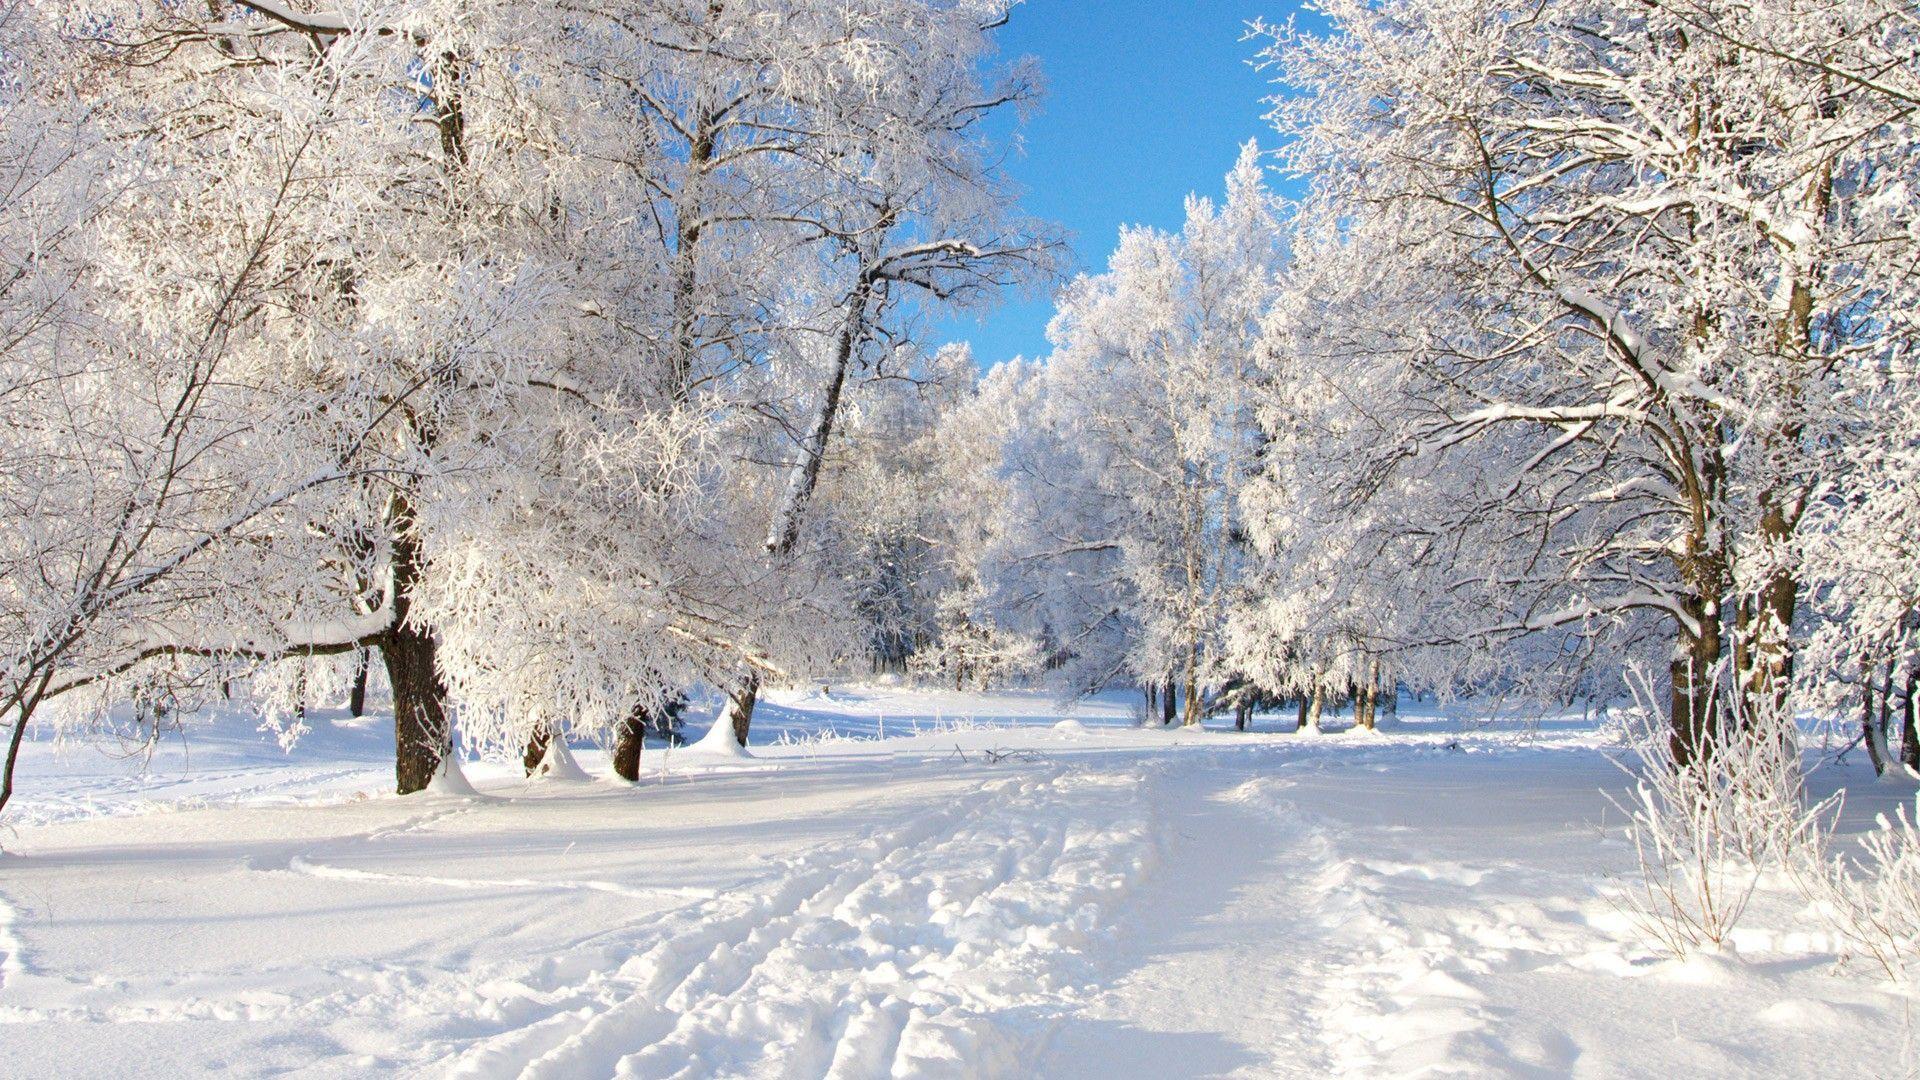 Snow Winter Widescreen 2 HD Wallpaper. Hdimges